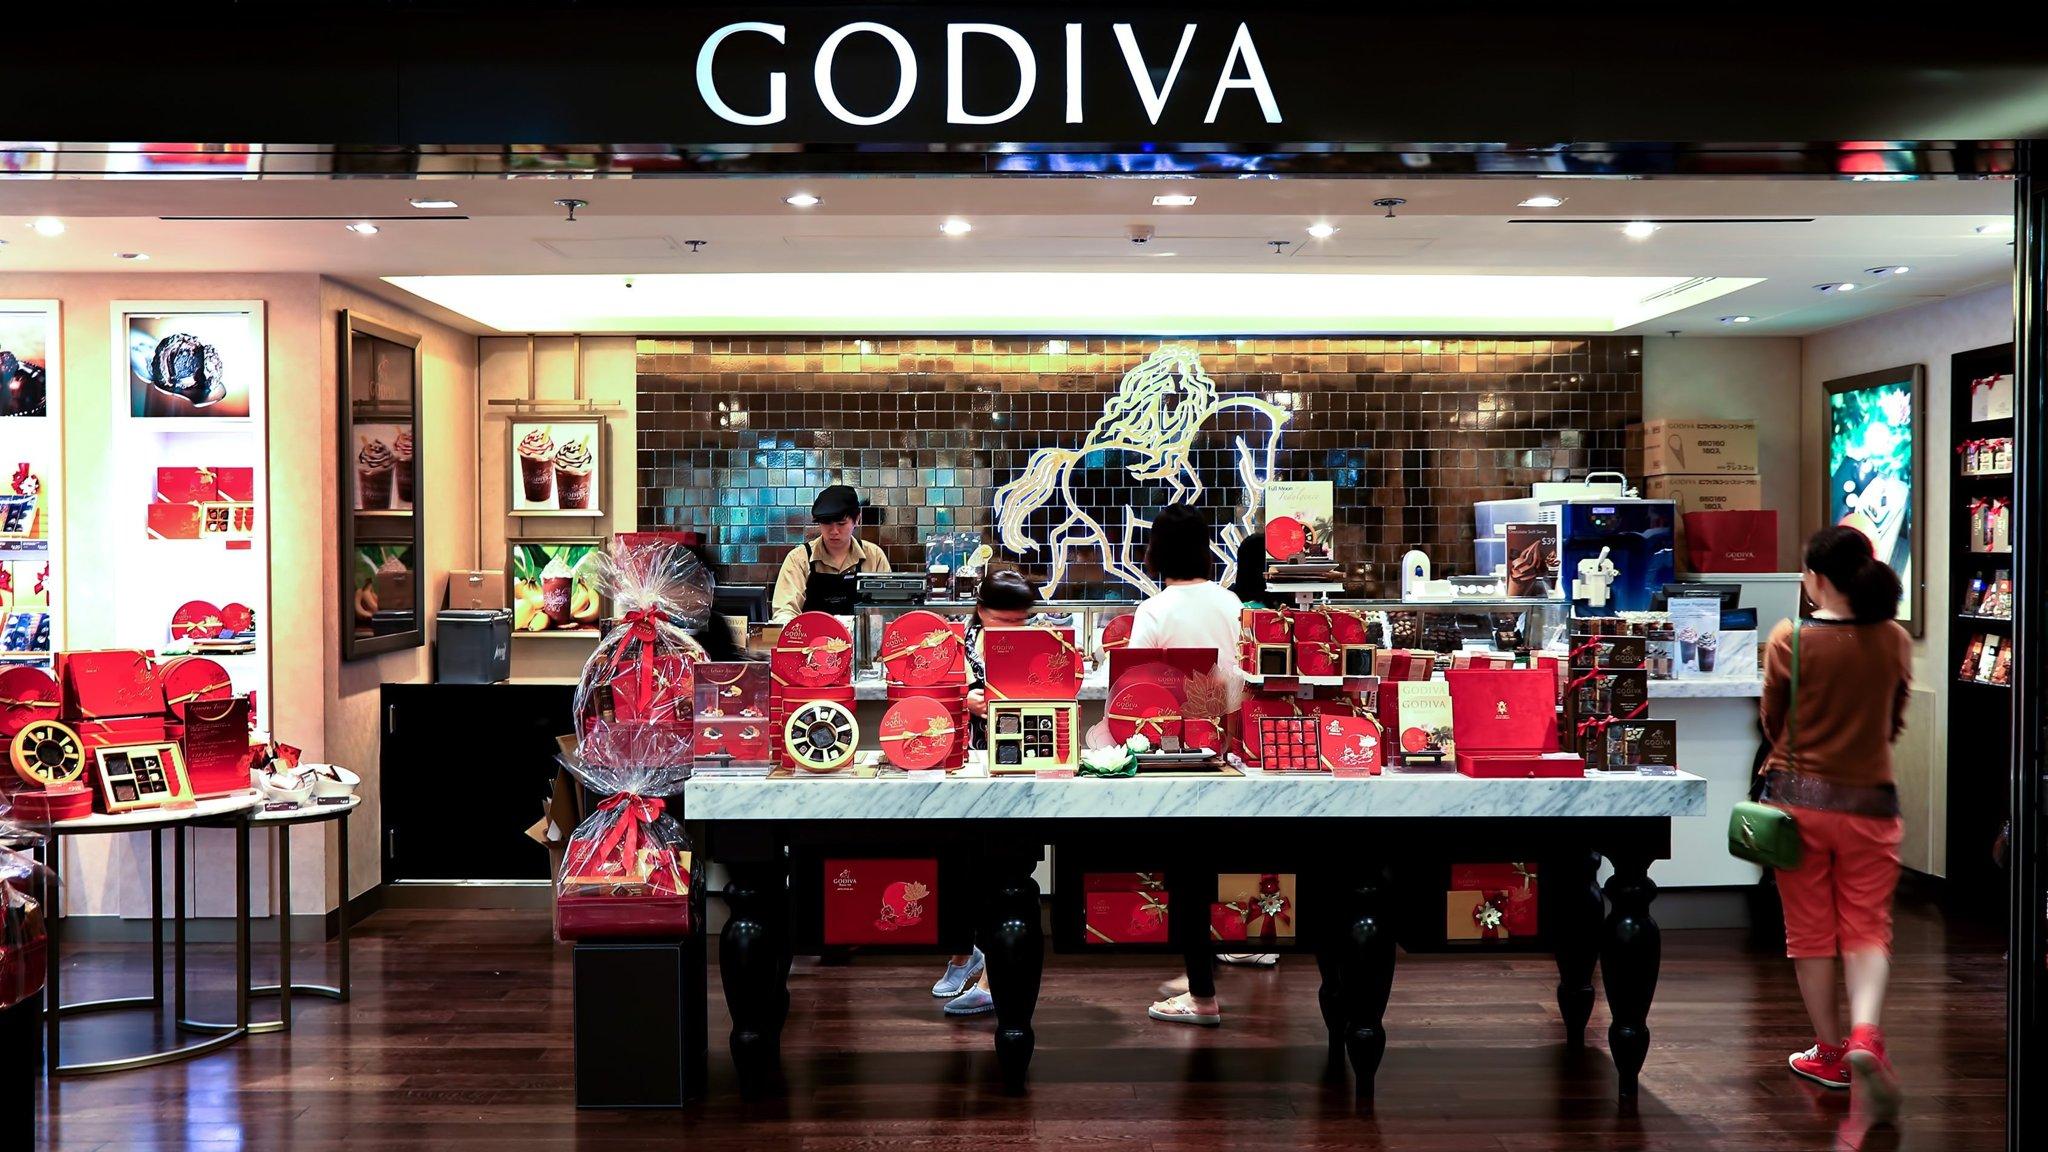 Godiva indulges global coffee craving with café rollout. Financial